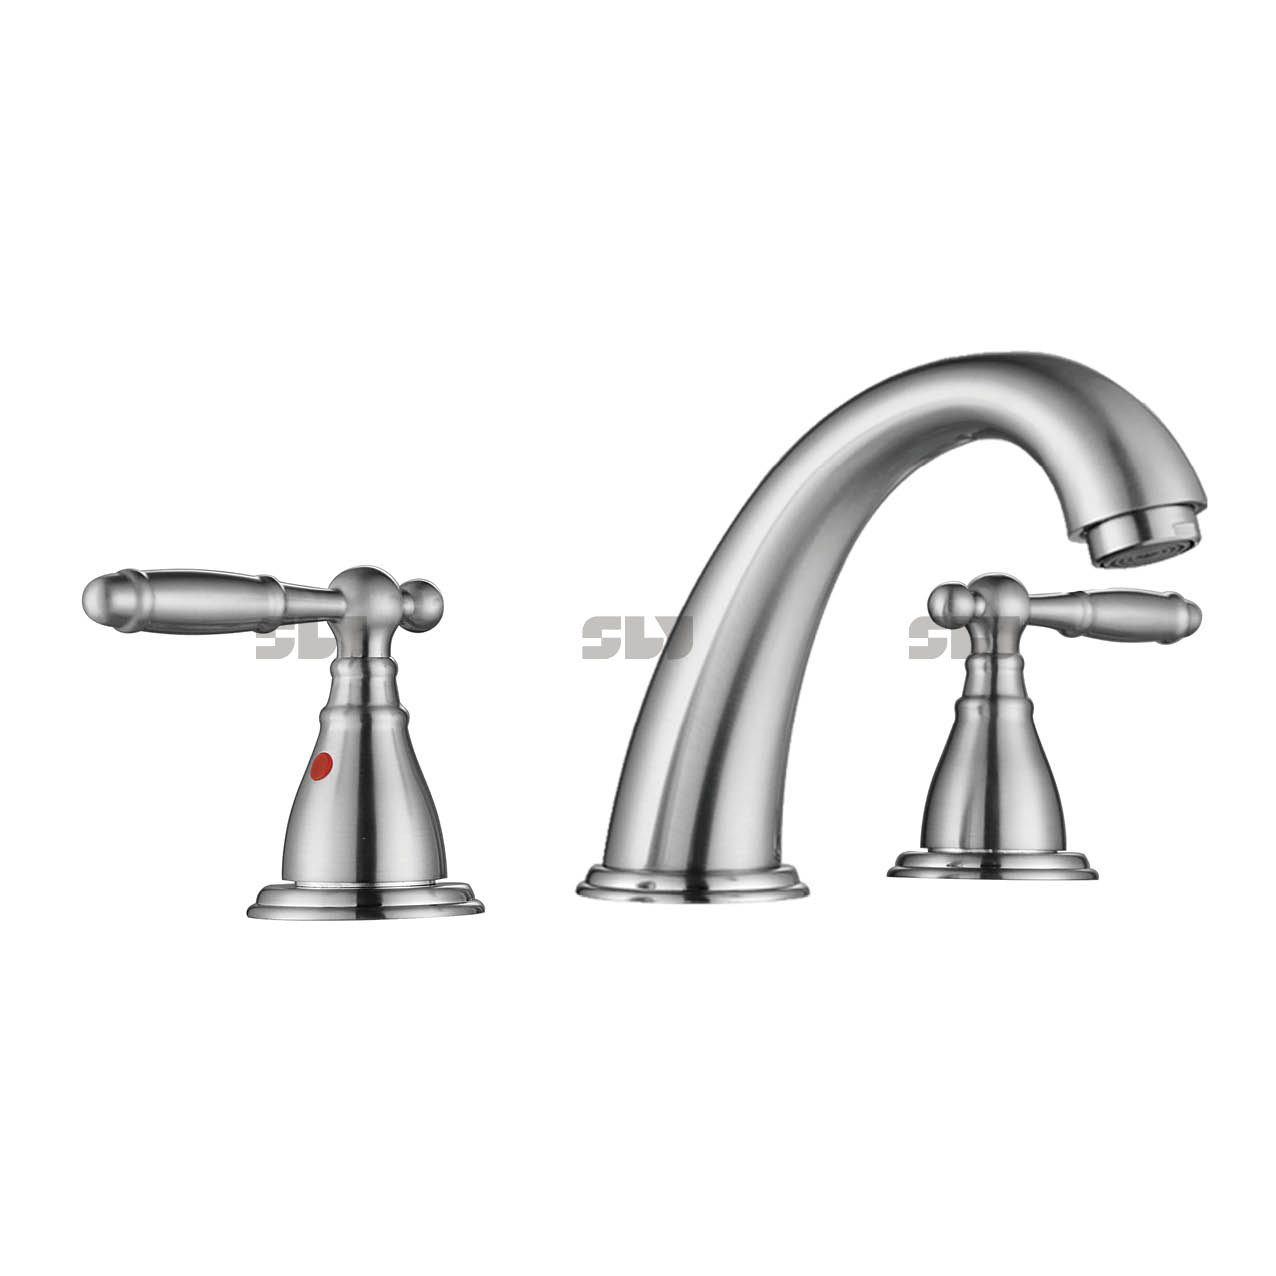 SLY Basin Mixer Double Handle 3 Hole Chrome 8 Inch Mixer Tap Lavatory Commercial Basin Vanity Bathroom Sink Tap